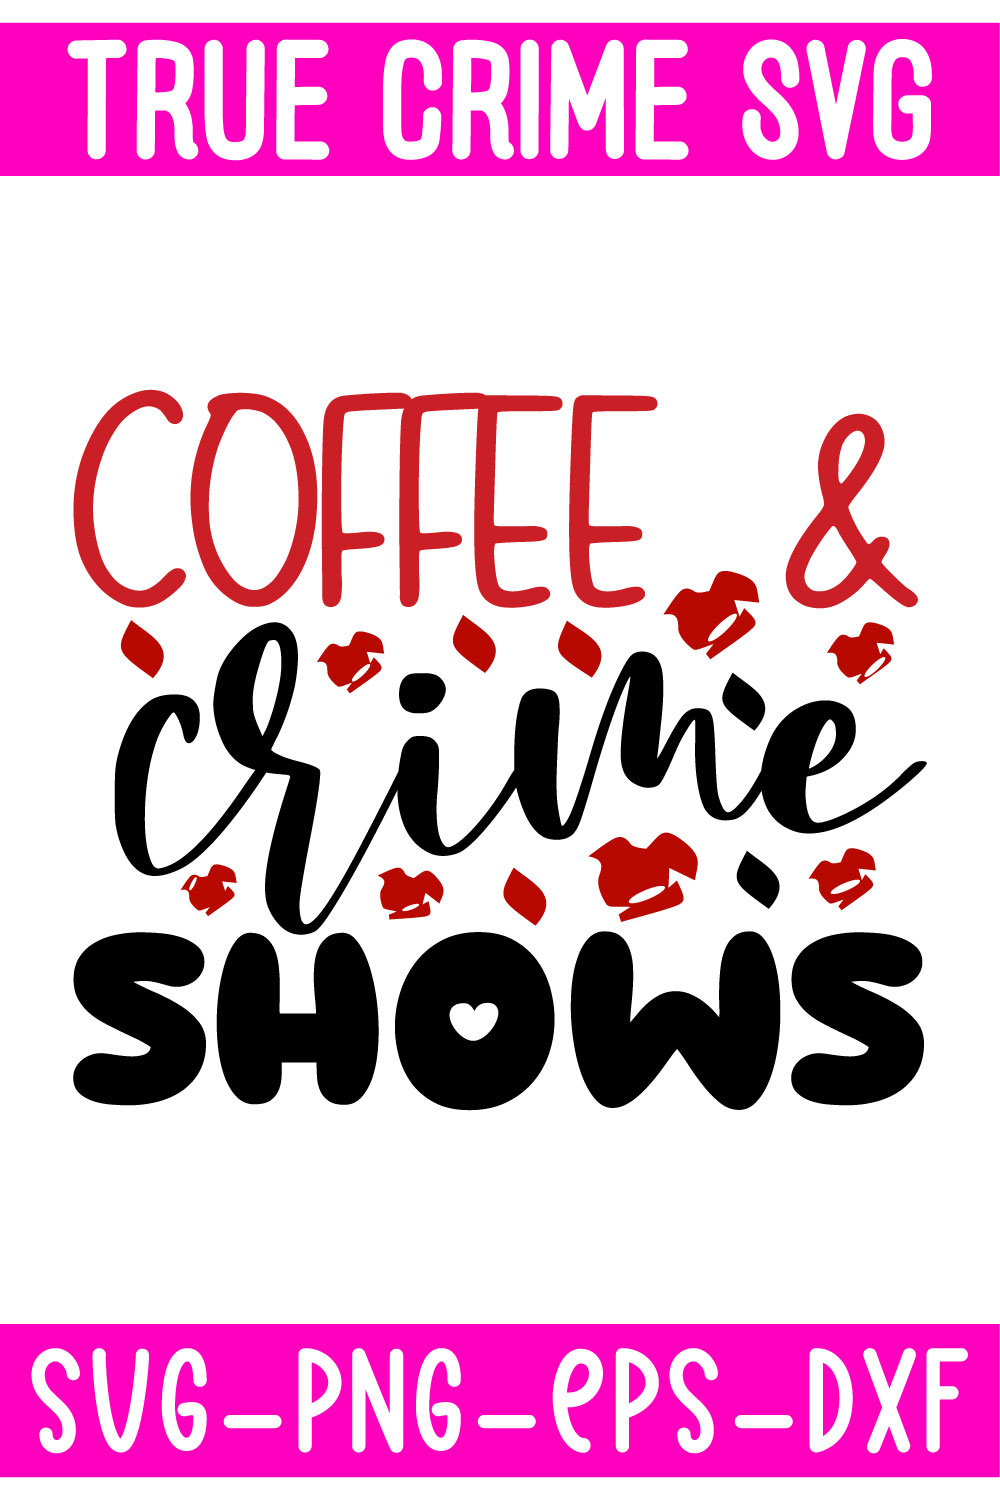 Coffee and crime shows svg - png - eps - dxf.